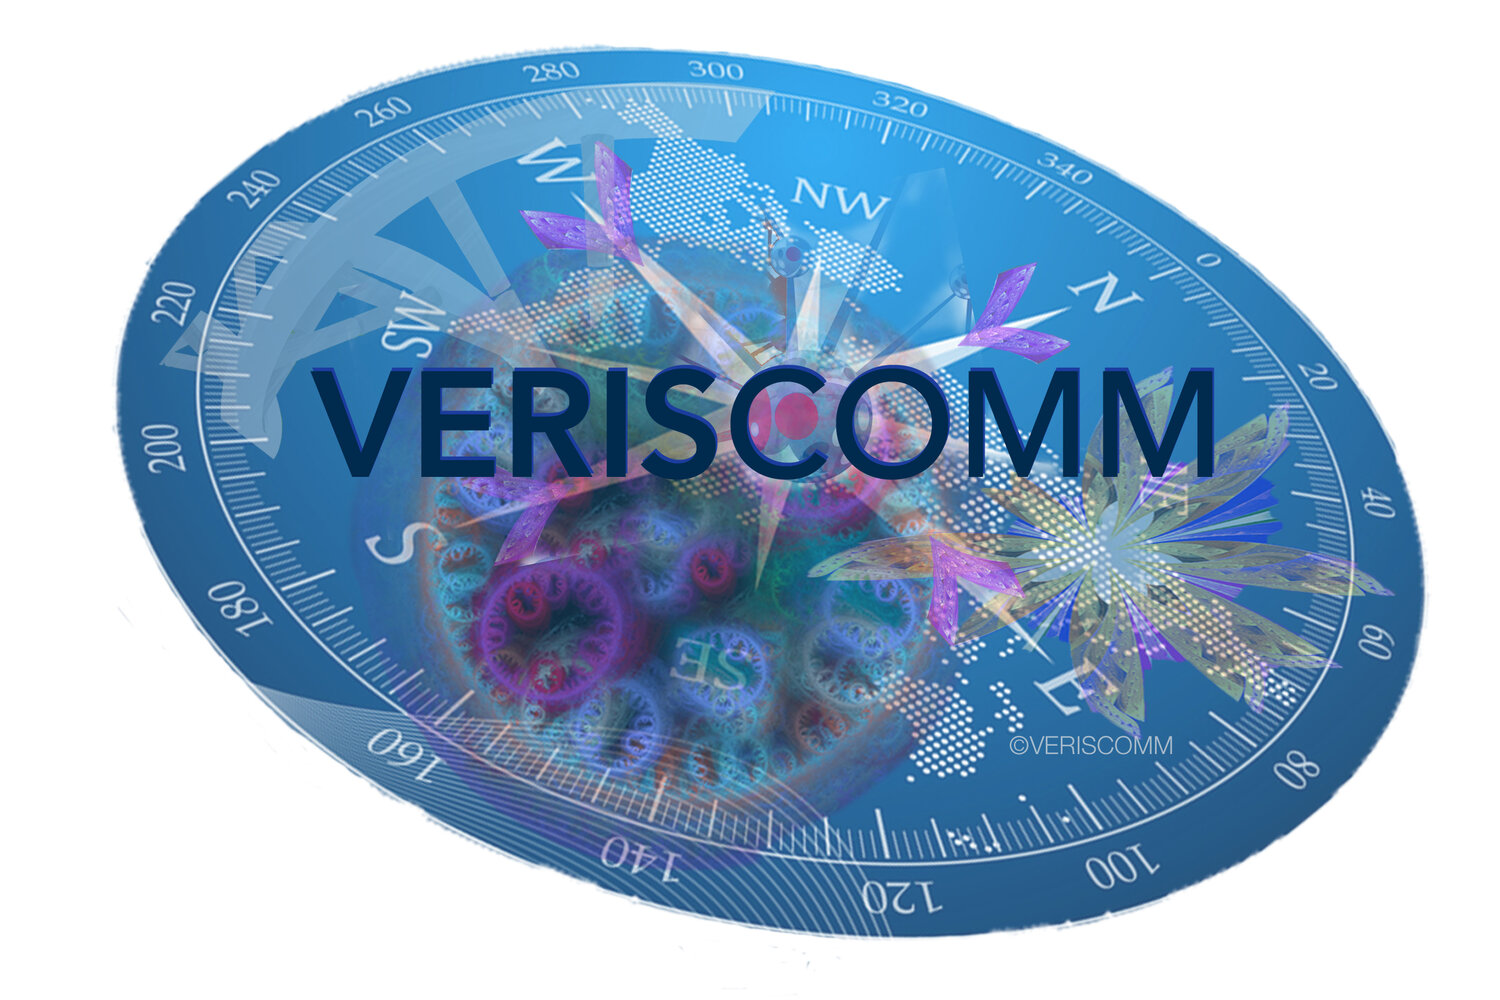  Veriscomm Bioscience Public Relations and Marketing Services